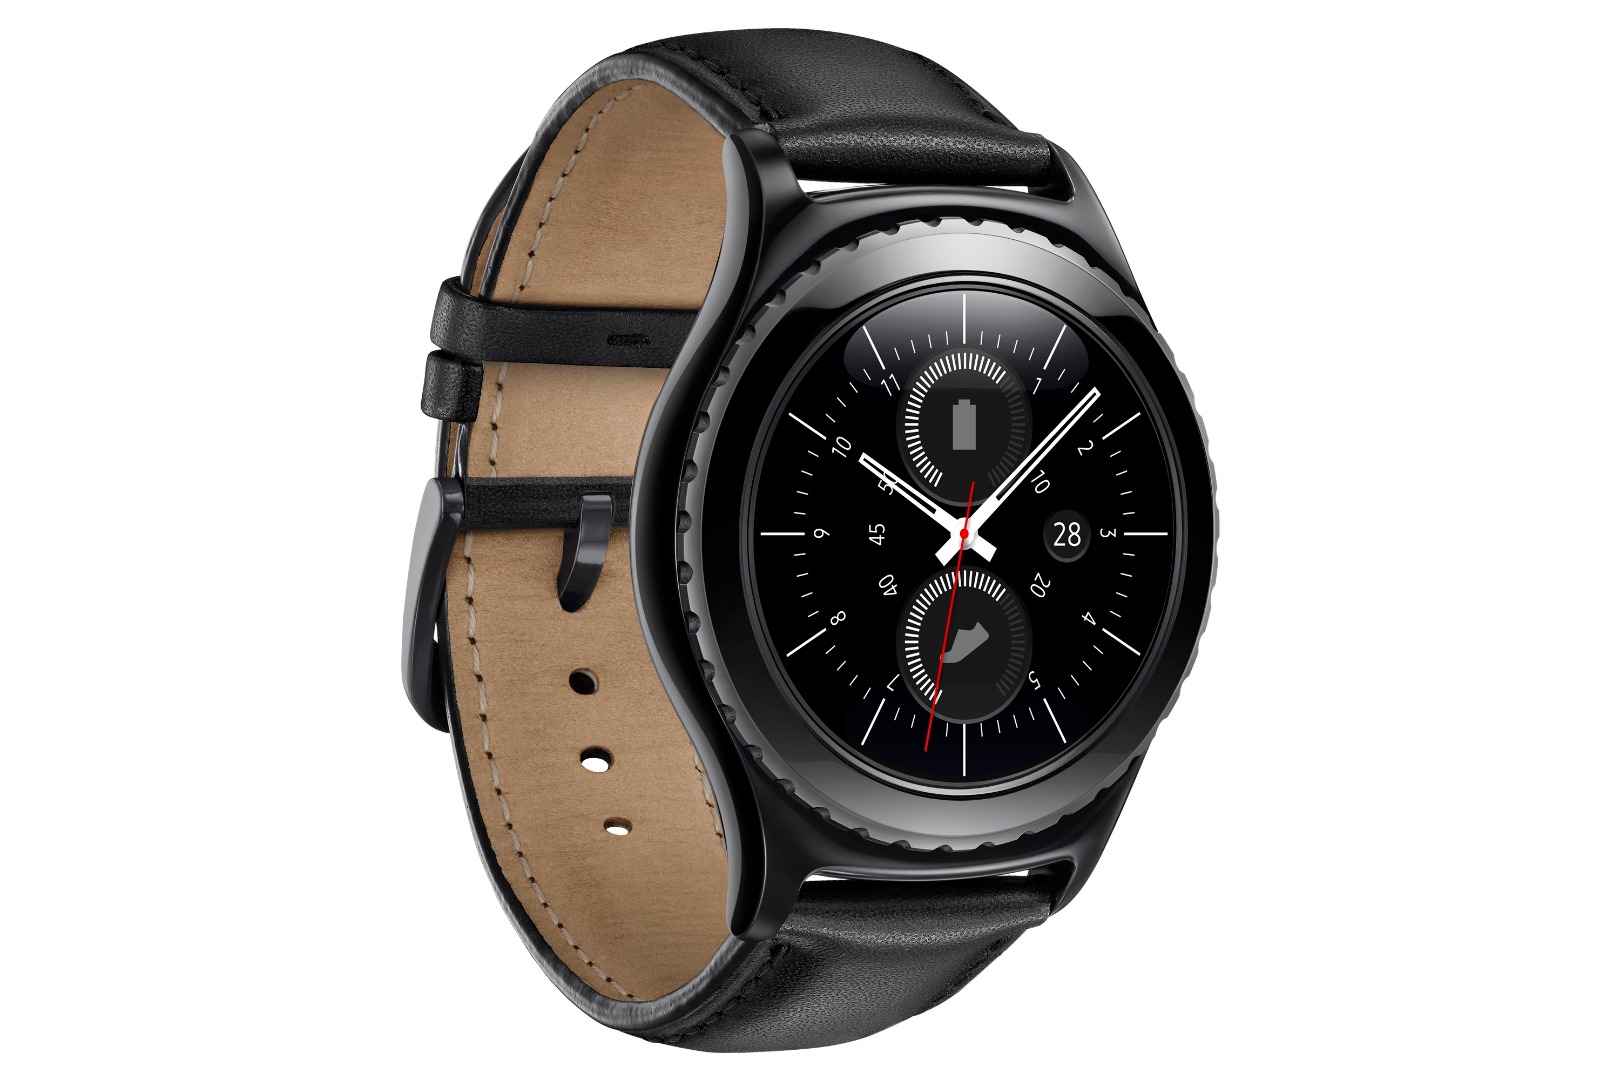 Samsung Gear S2, Gear S2 classic out in Singapore in October